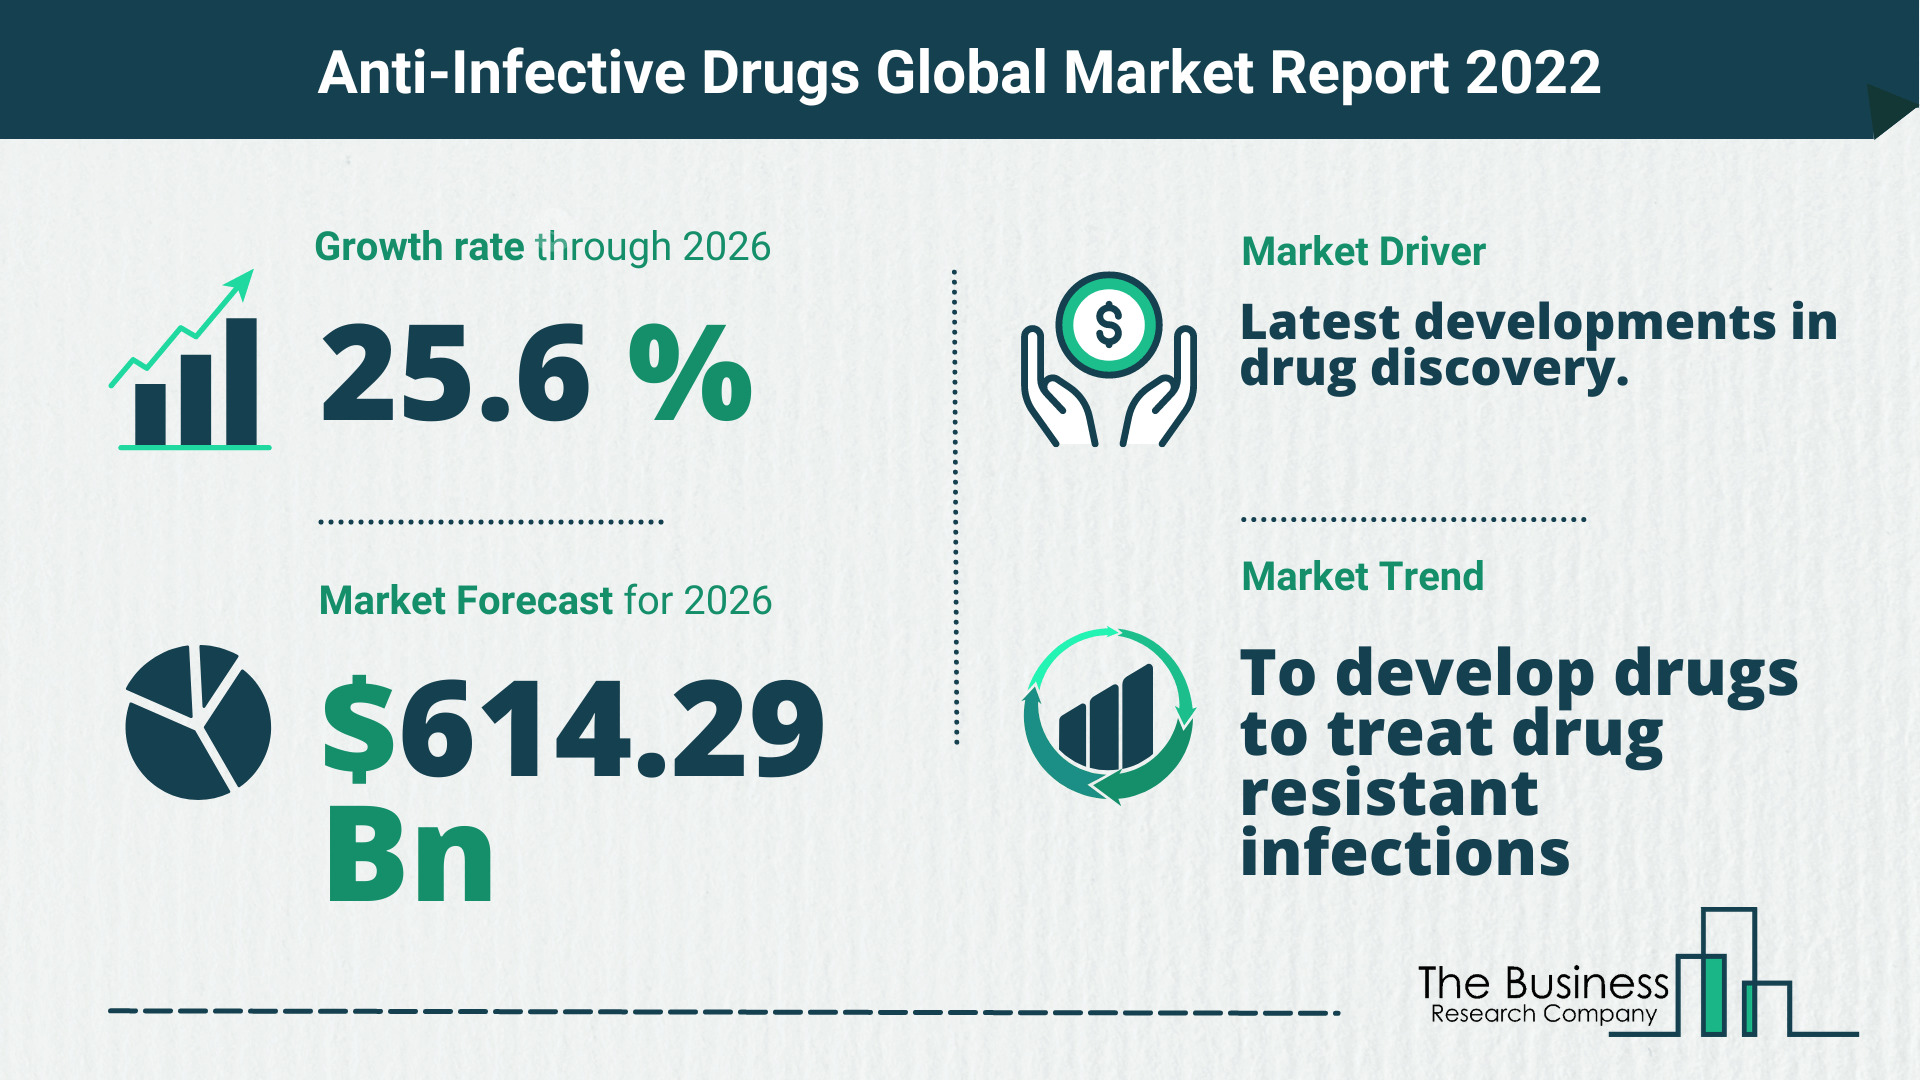 How Will The Anti-Infective Drugs Market Grow In 2022?